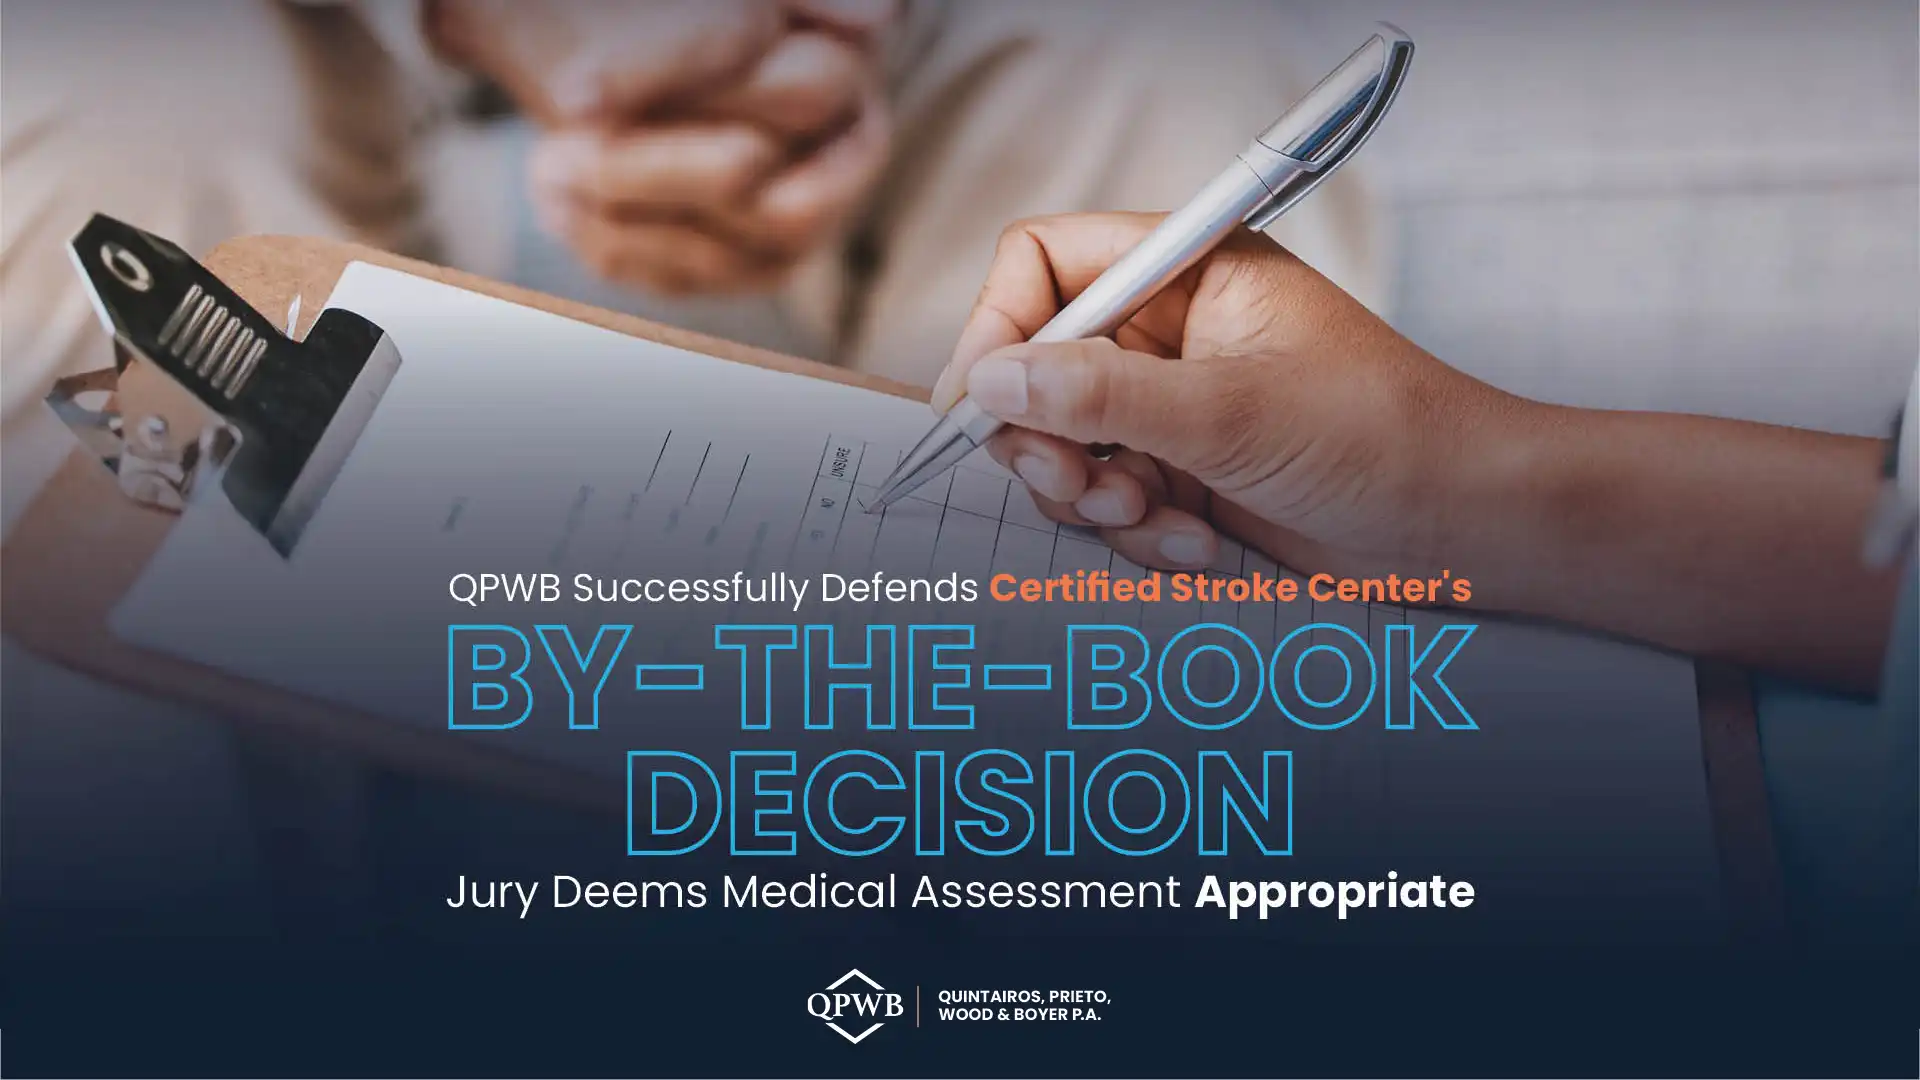 QPWB Successfully Defends Certified Stroke Center’s By-The-Book Decision; Jury Deems Medical Assessment Appropriate